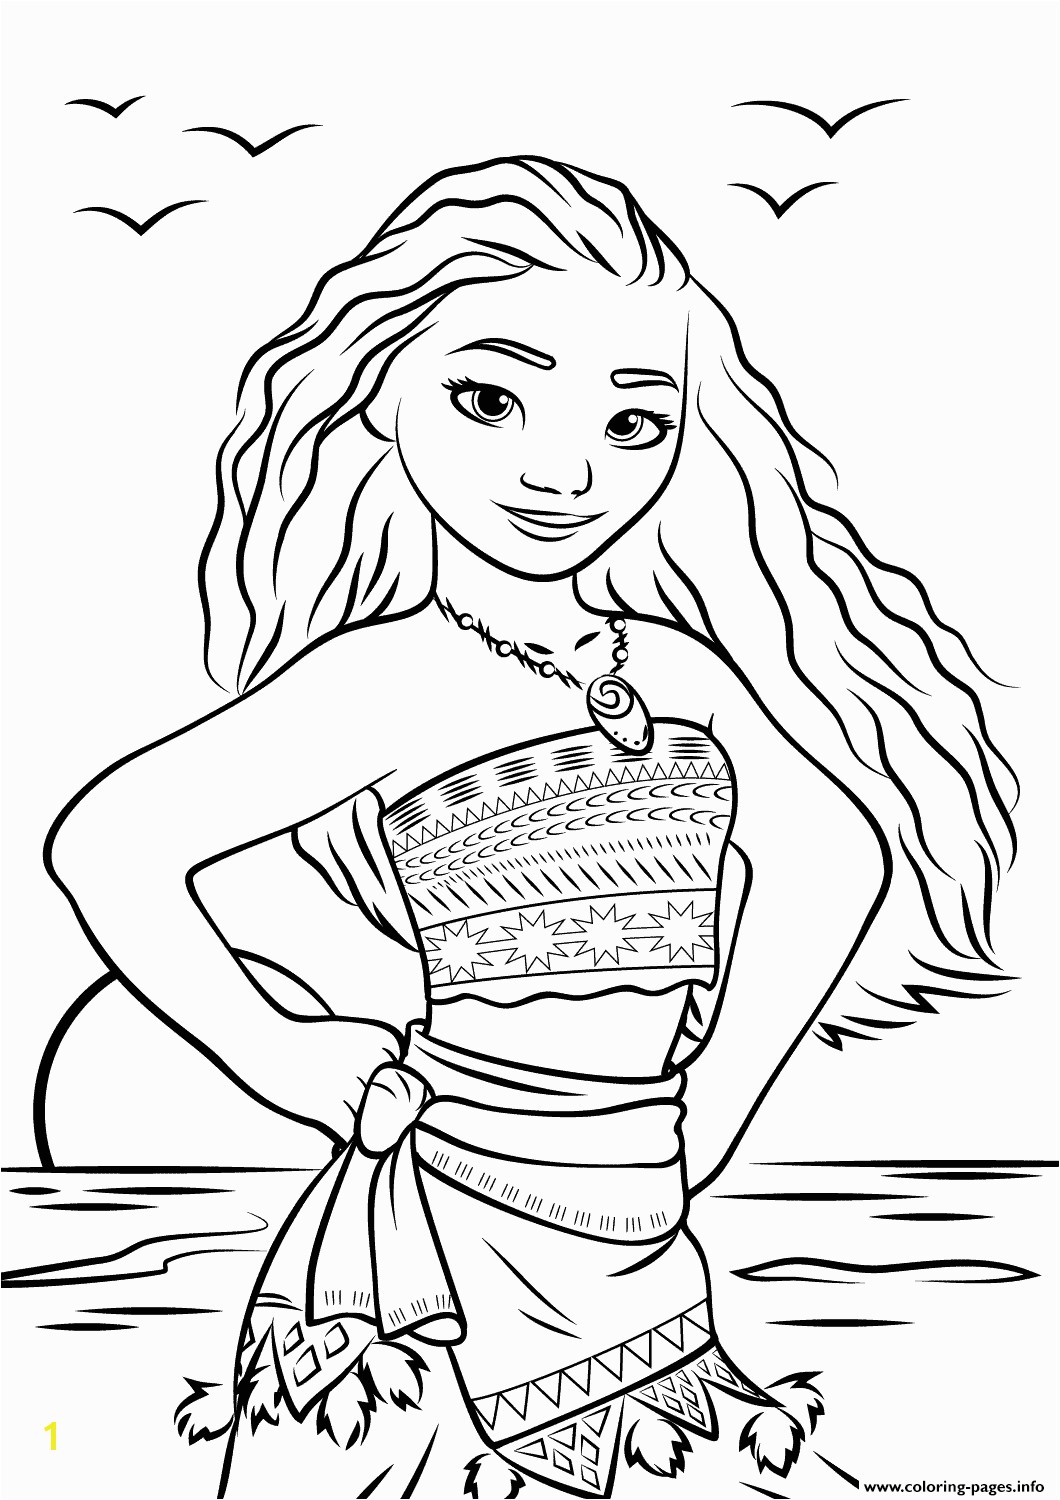 Inspirational Moana Printable Coloring Pages